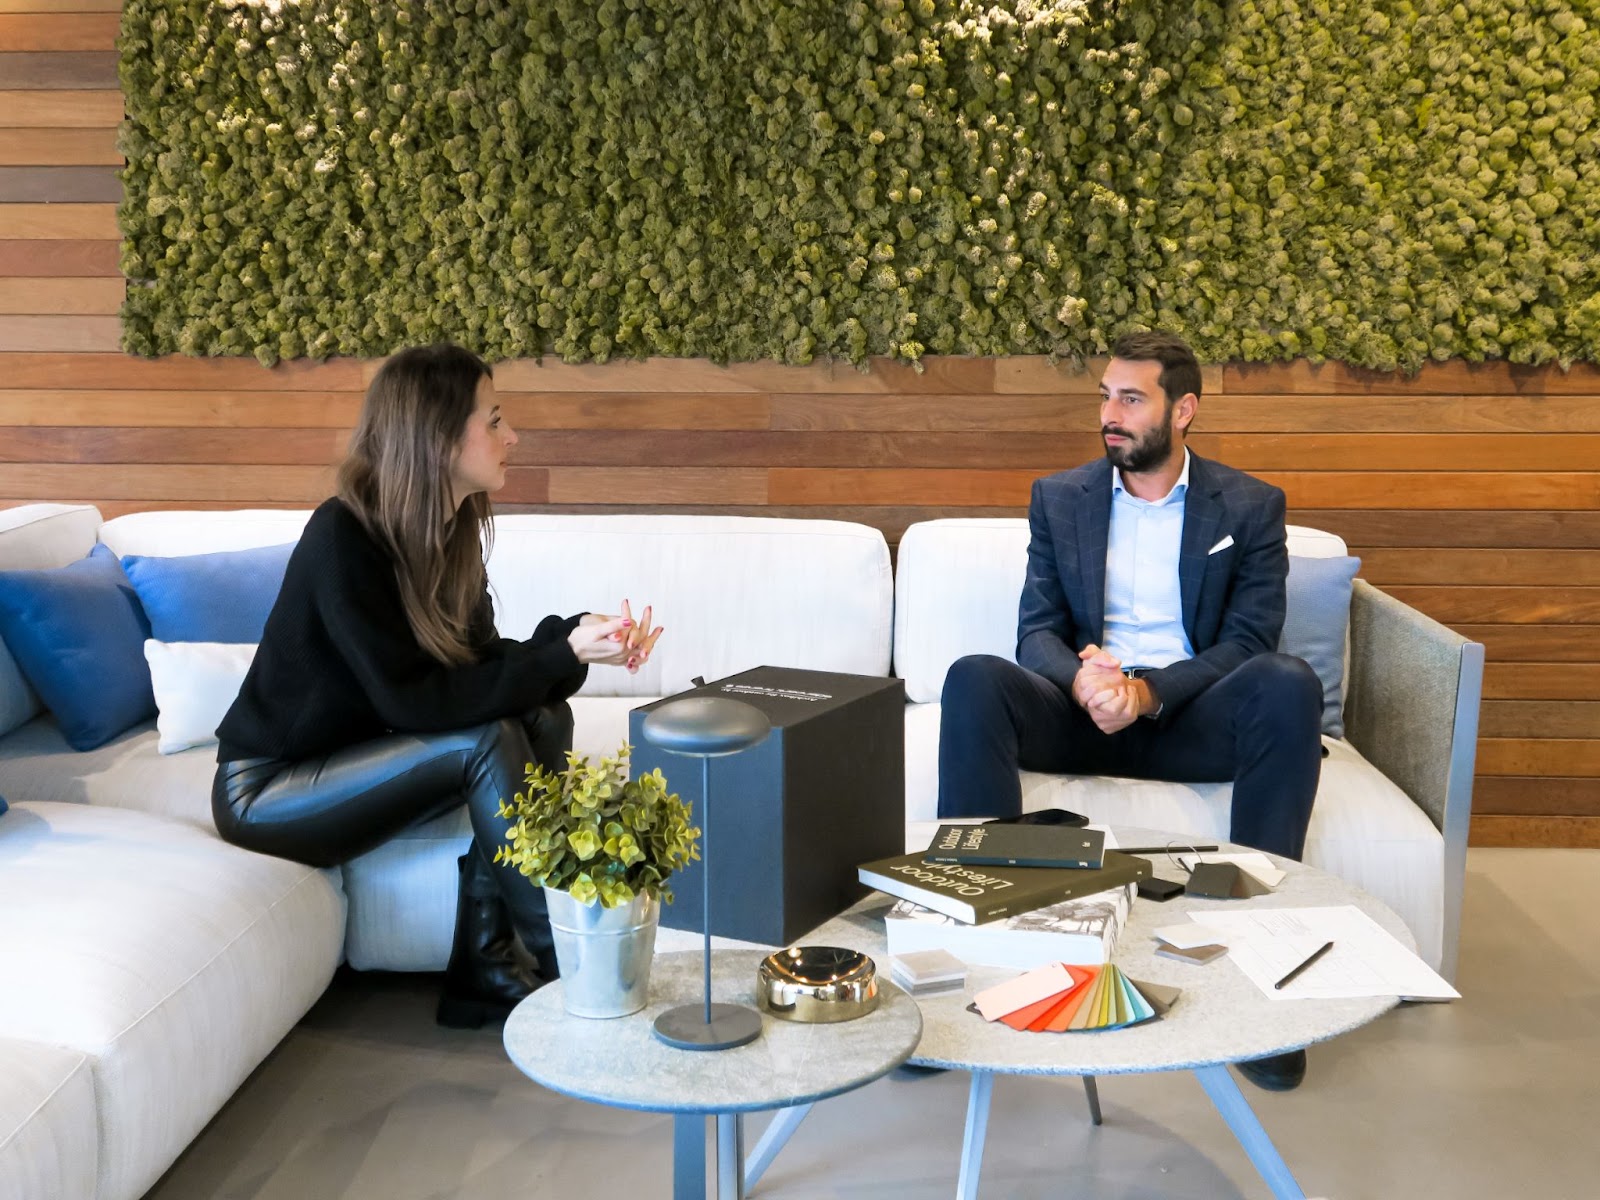 In conversation with Claudio Alfieri, Commercial Manager at Edenpark Firenze, an Italian company specialized in outdoor design